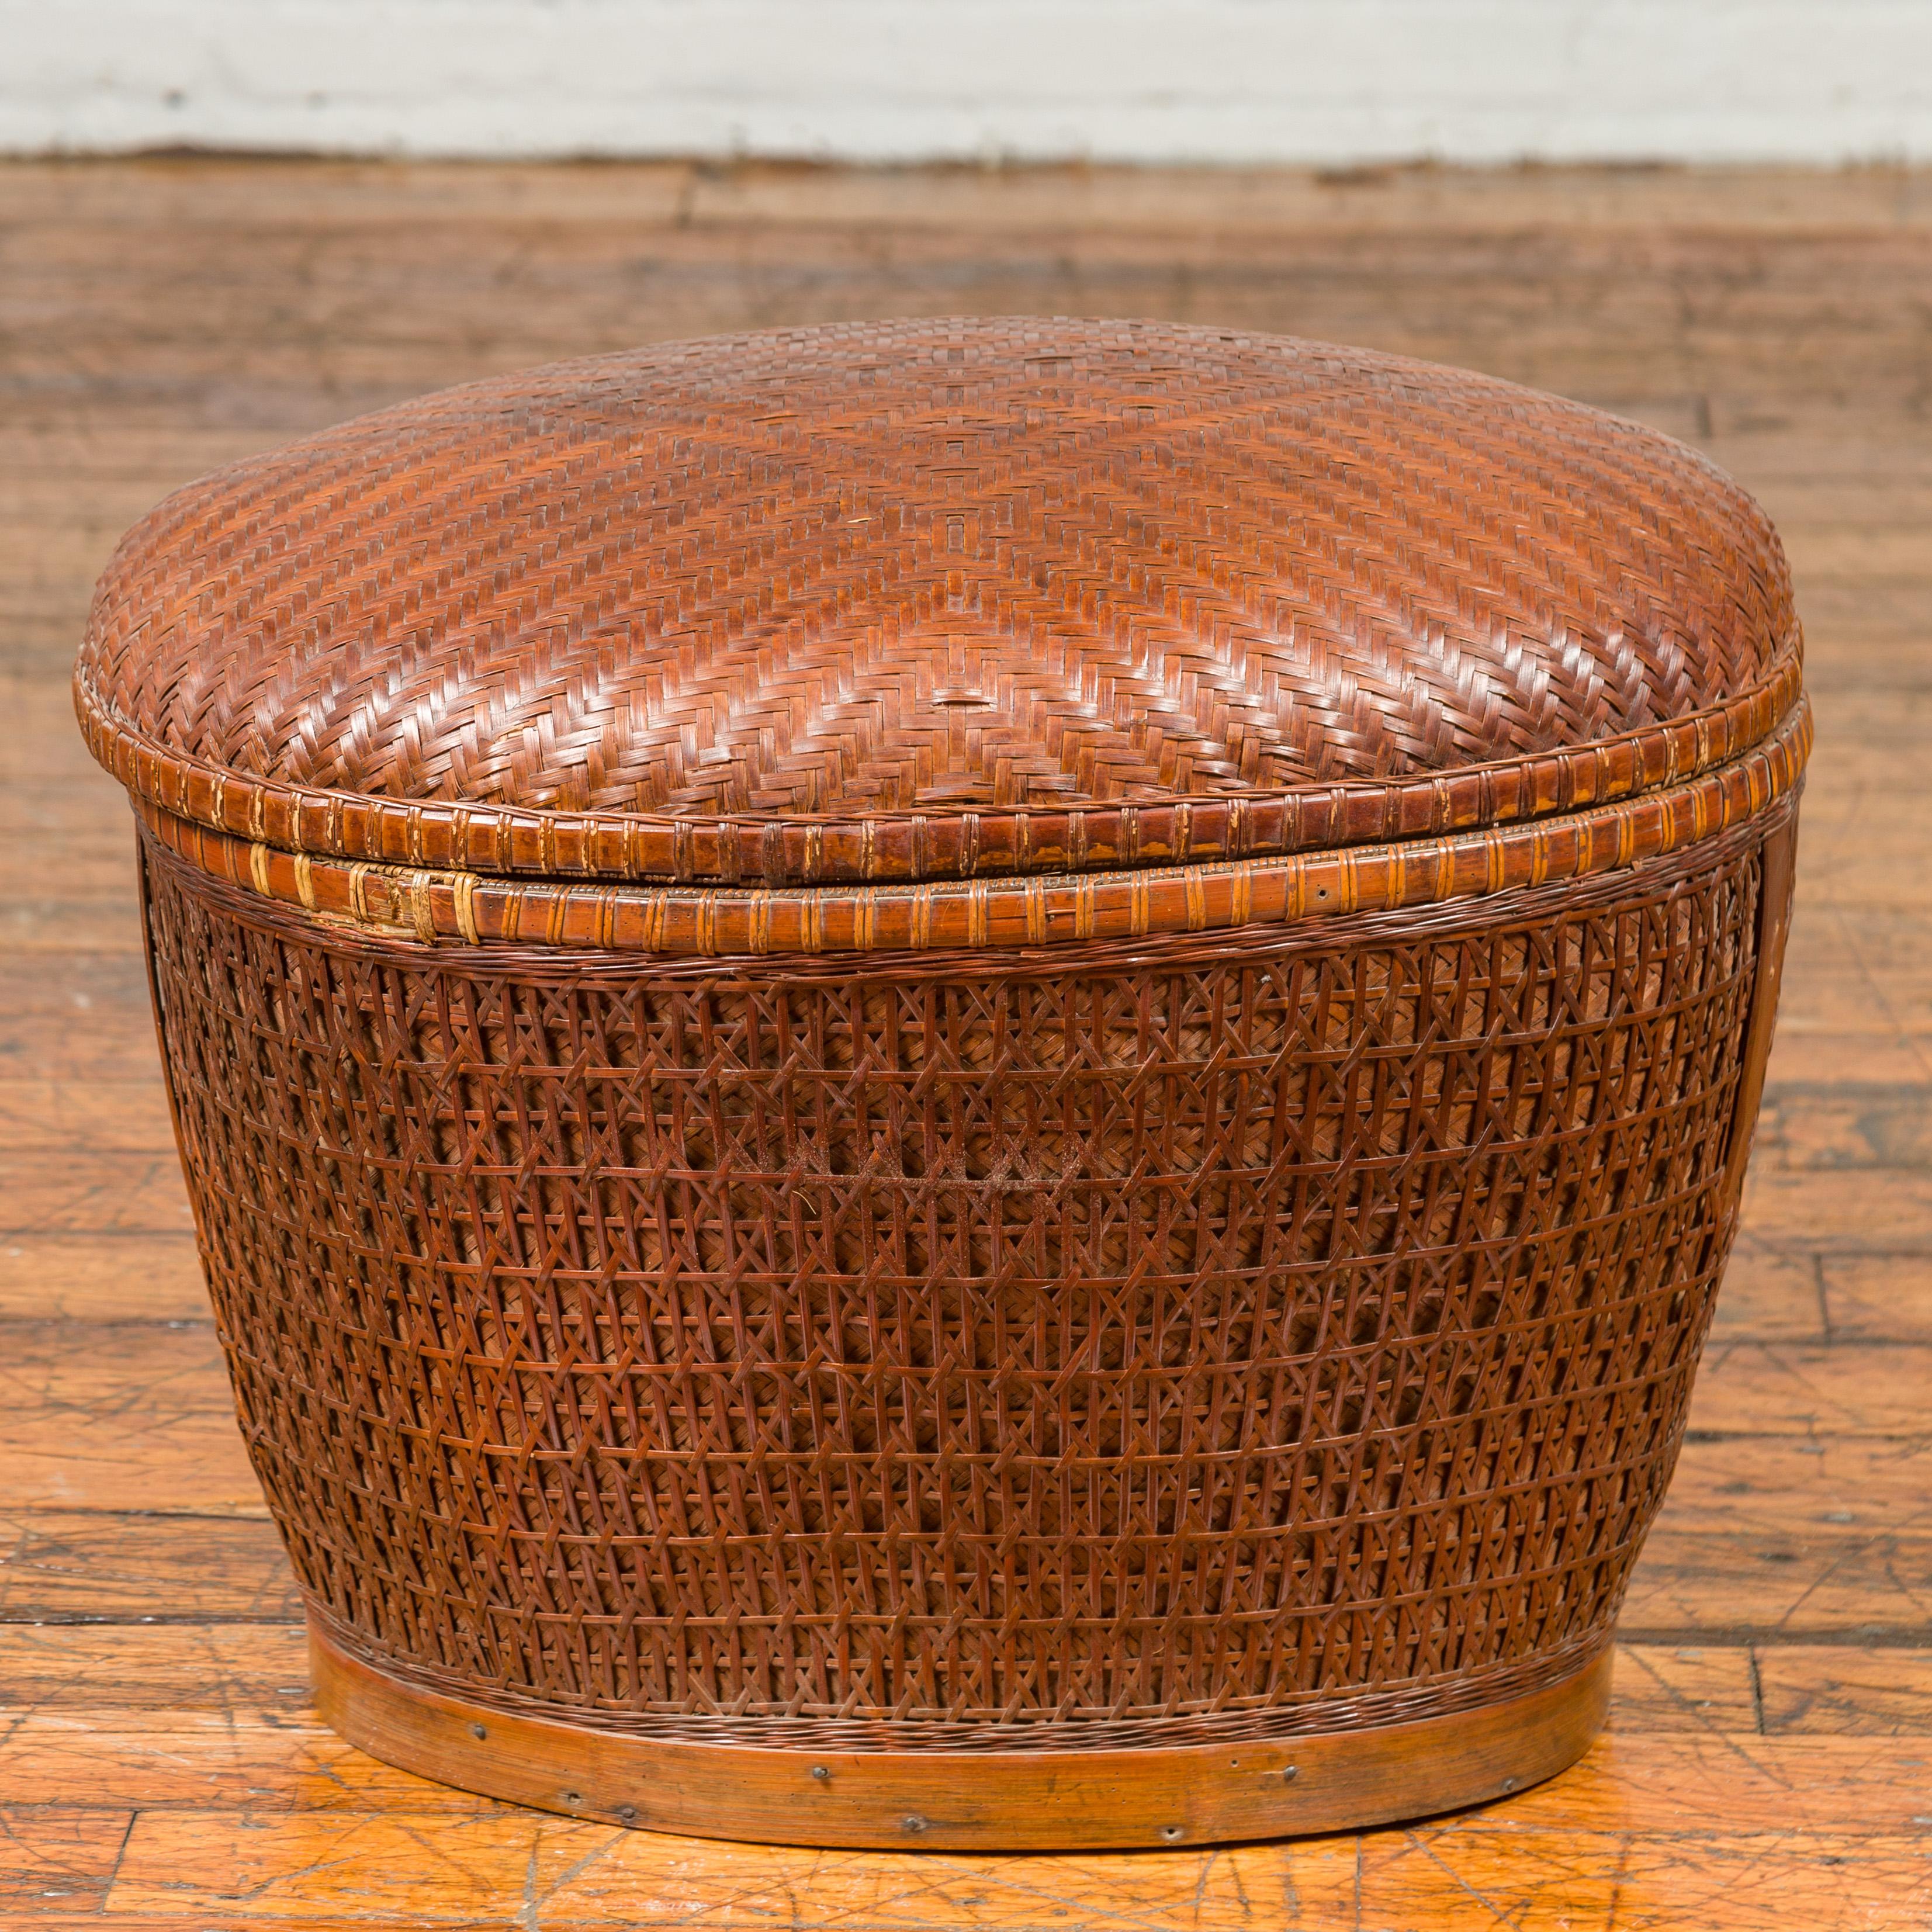 Details about  / Vintage Handmade Oval Bread Rattan Woven Basket Made Decorative With Handle